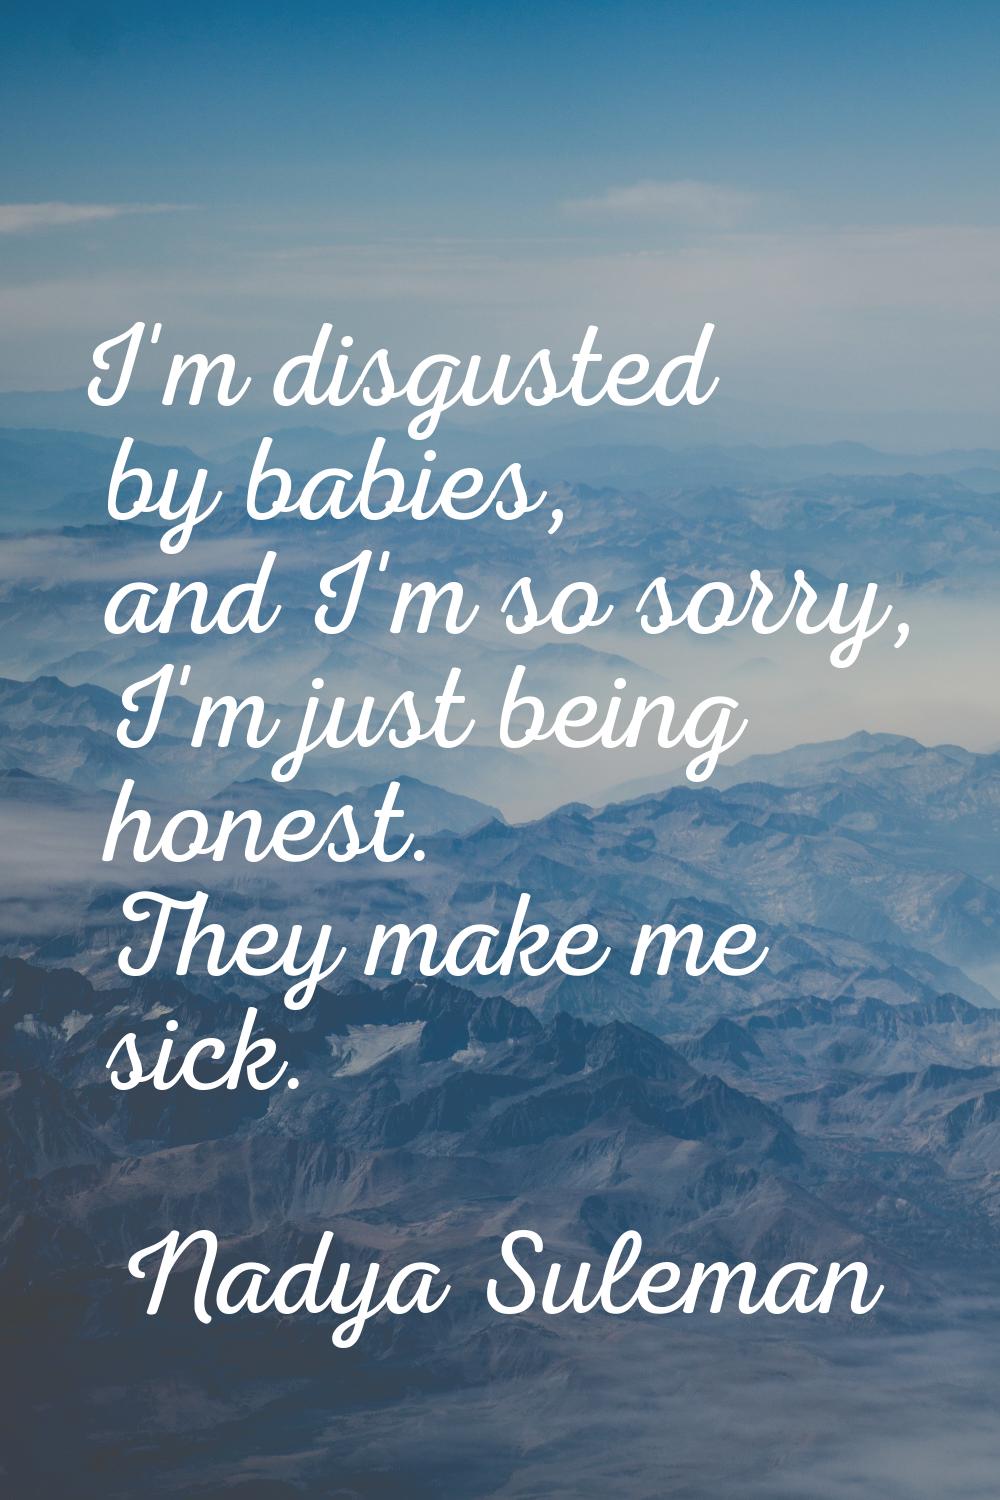 I'm disgusted by babies, and I'm so sorry, I'm just being honest. They make me sick.